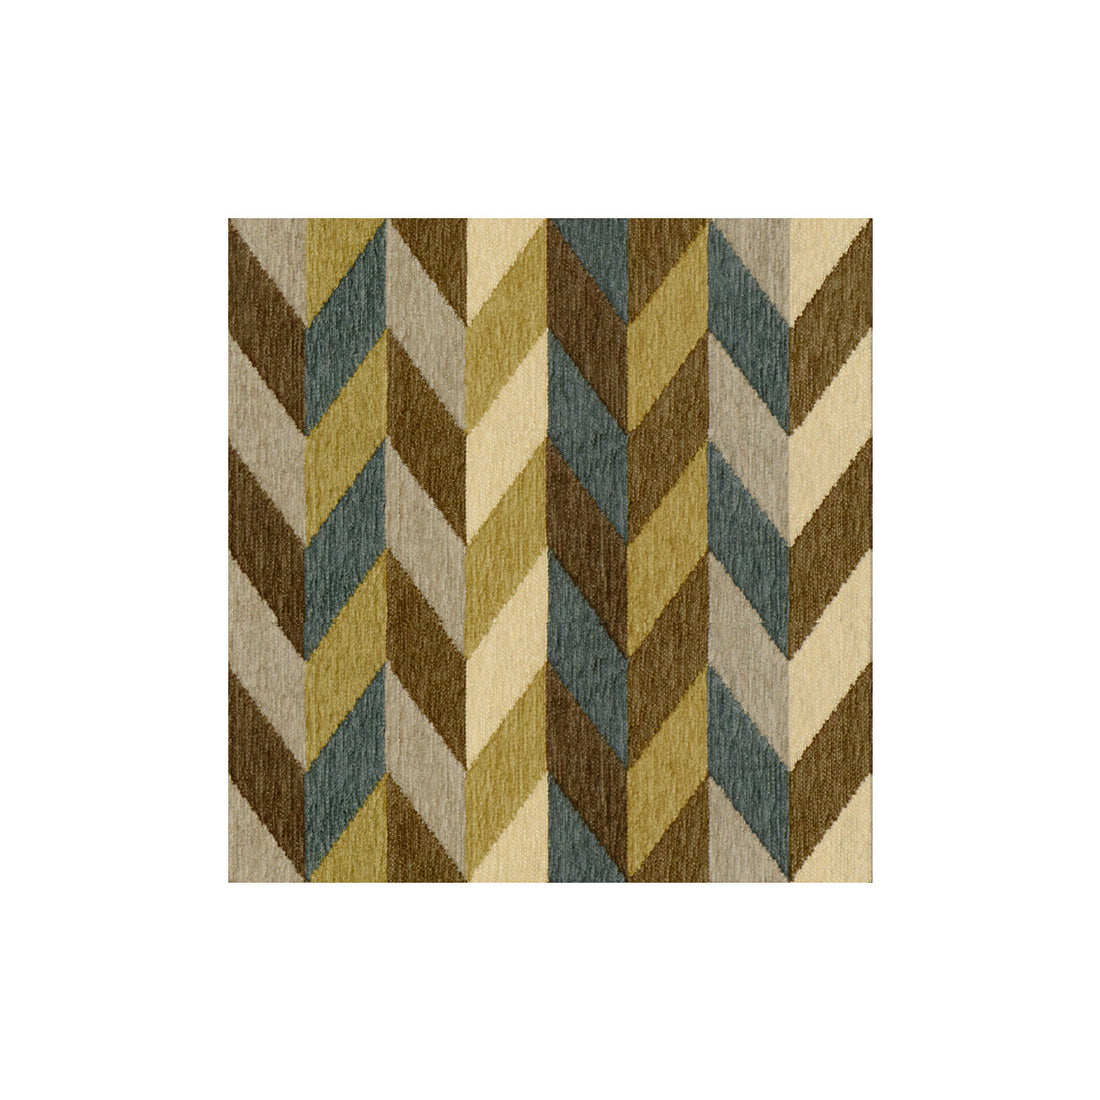 Northside fabric in surf color - pattern 32841.311.0 - by Kravet Basics in the Thom Filicia collection